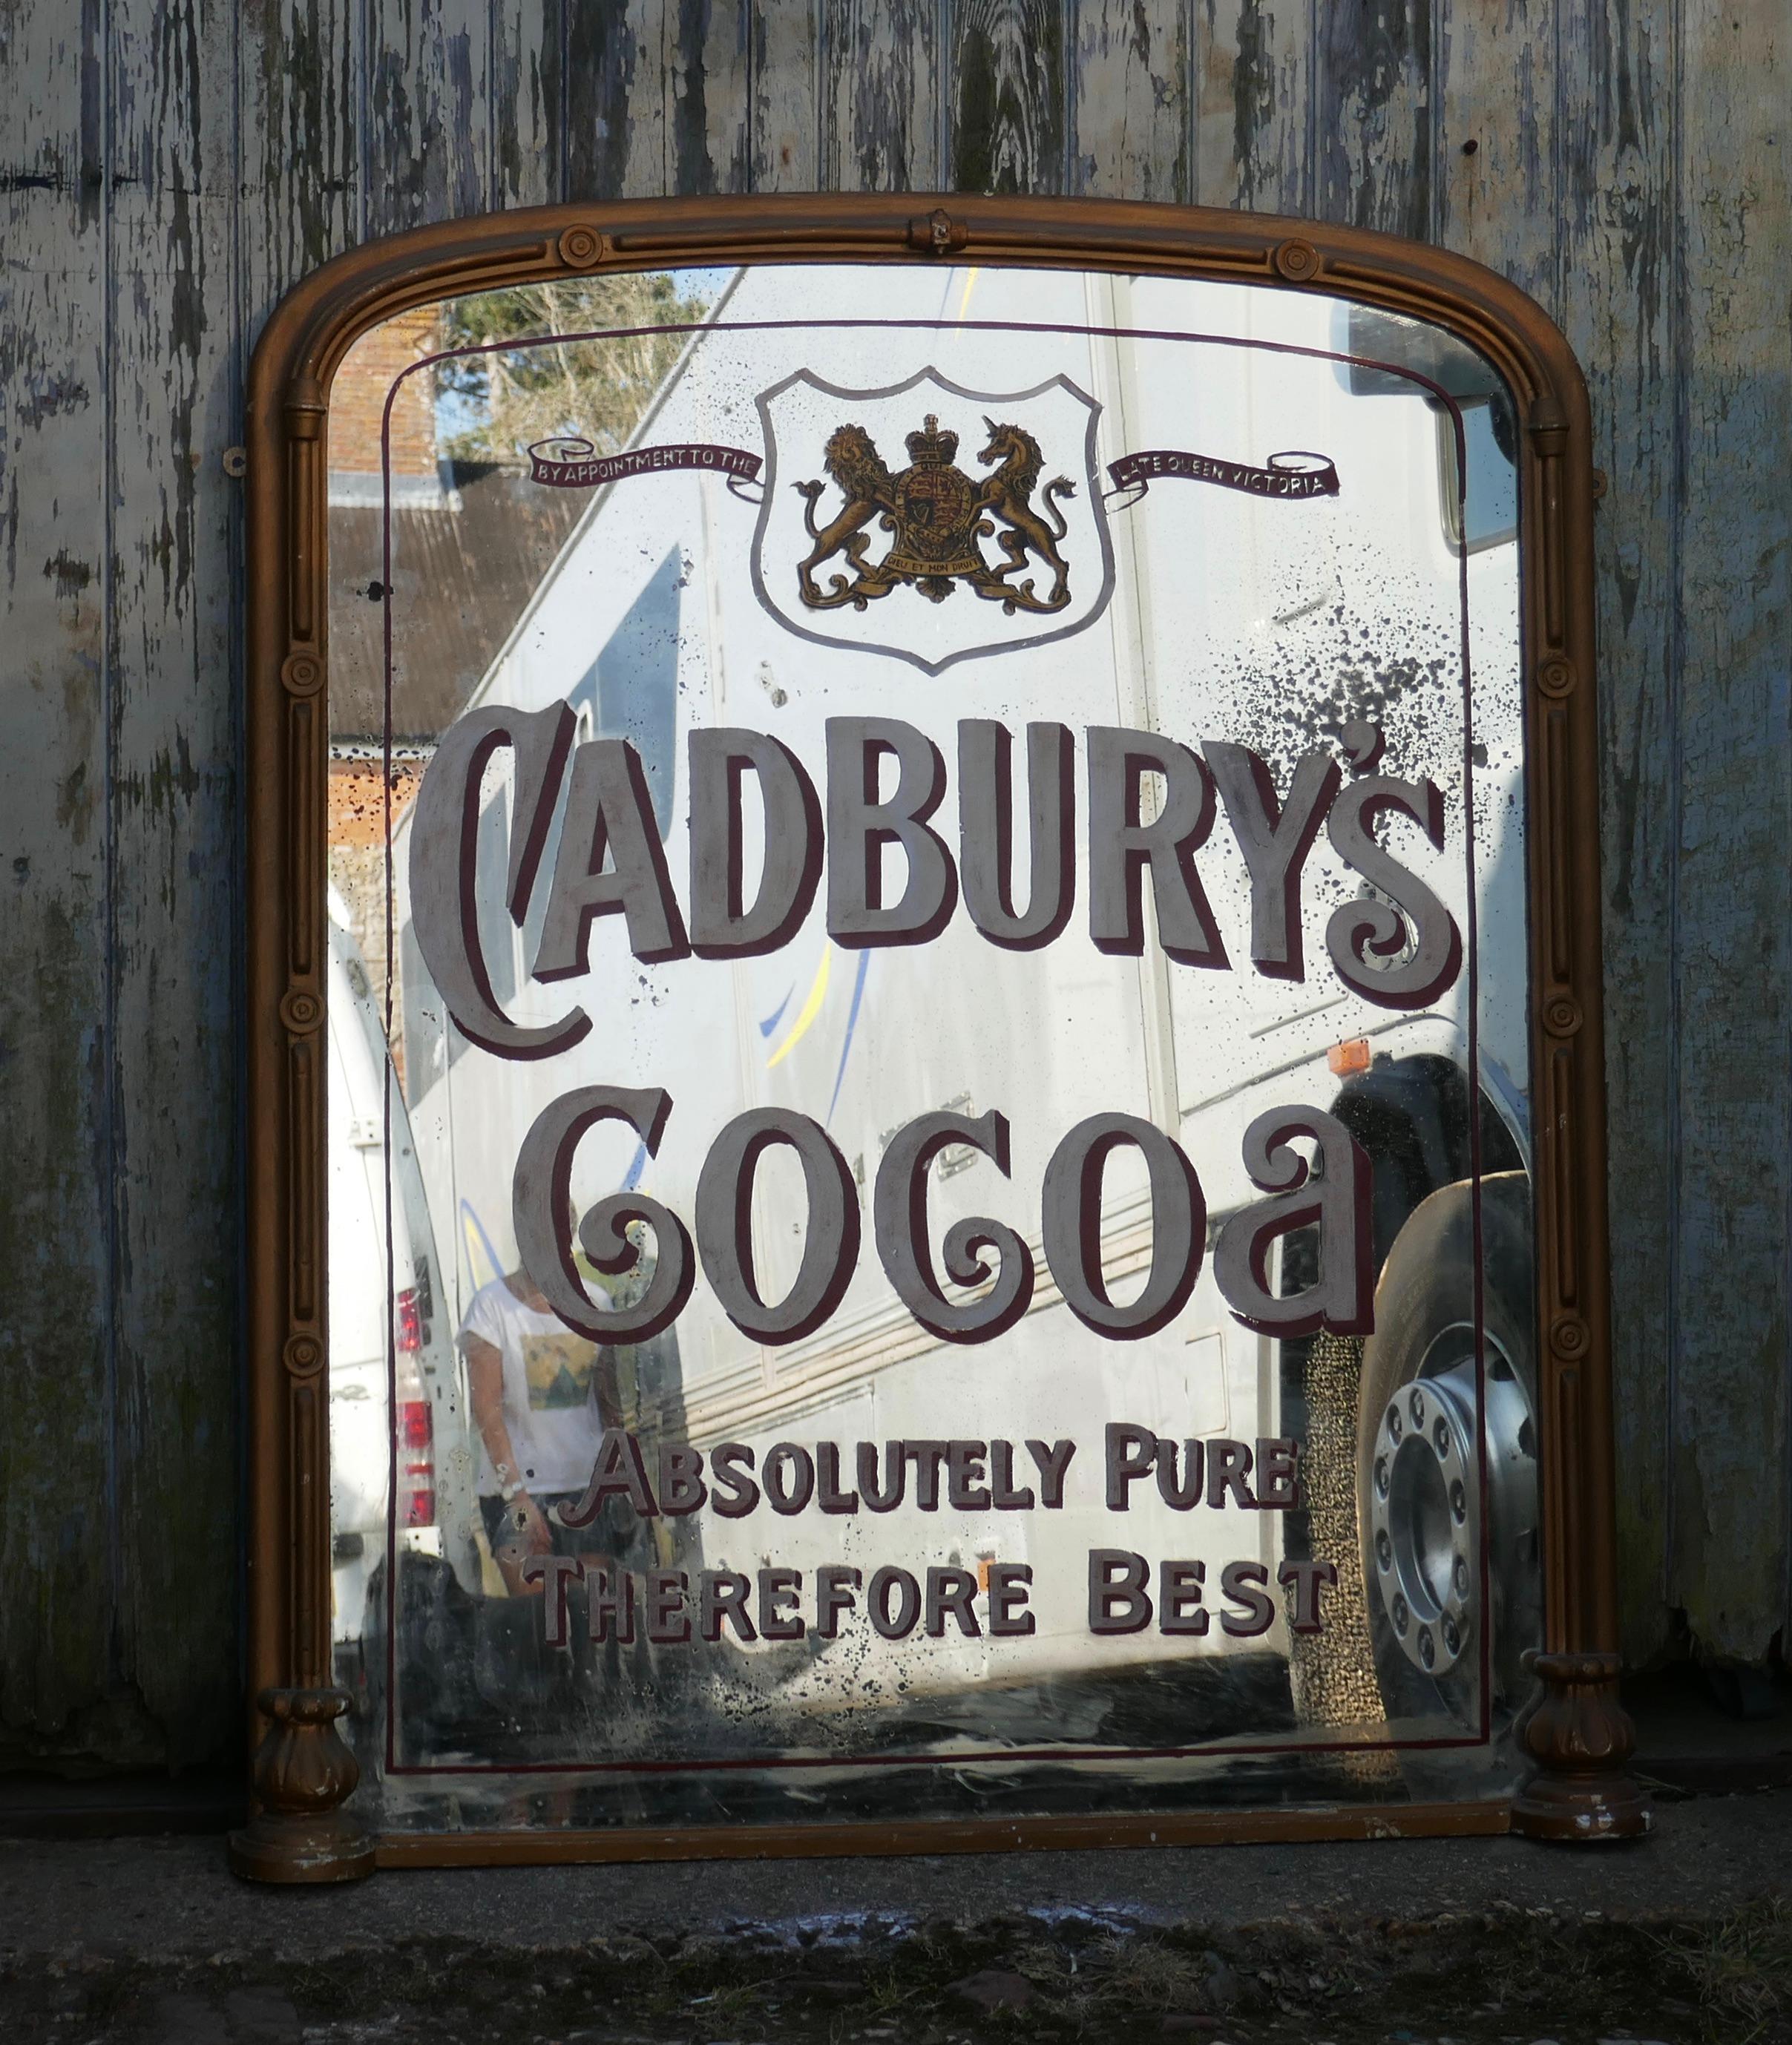 Early 20th Century Large Cadbury Coca Shop Advertising Wall Mirror, with Royal Appointment